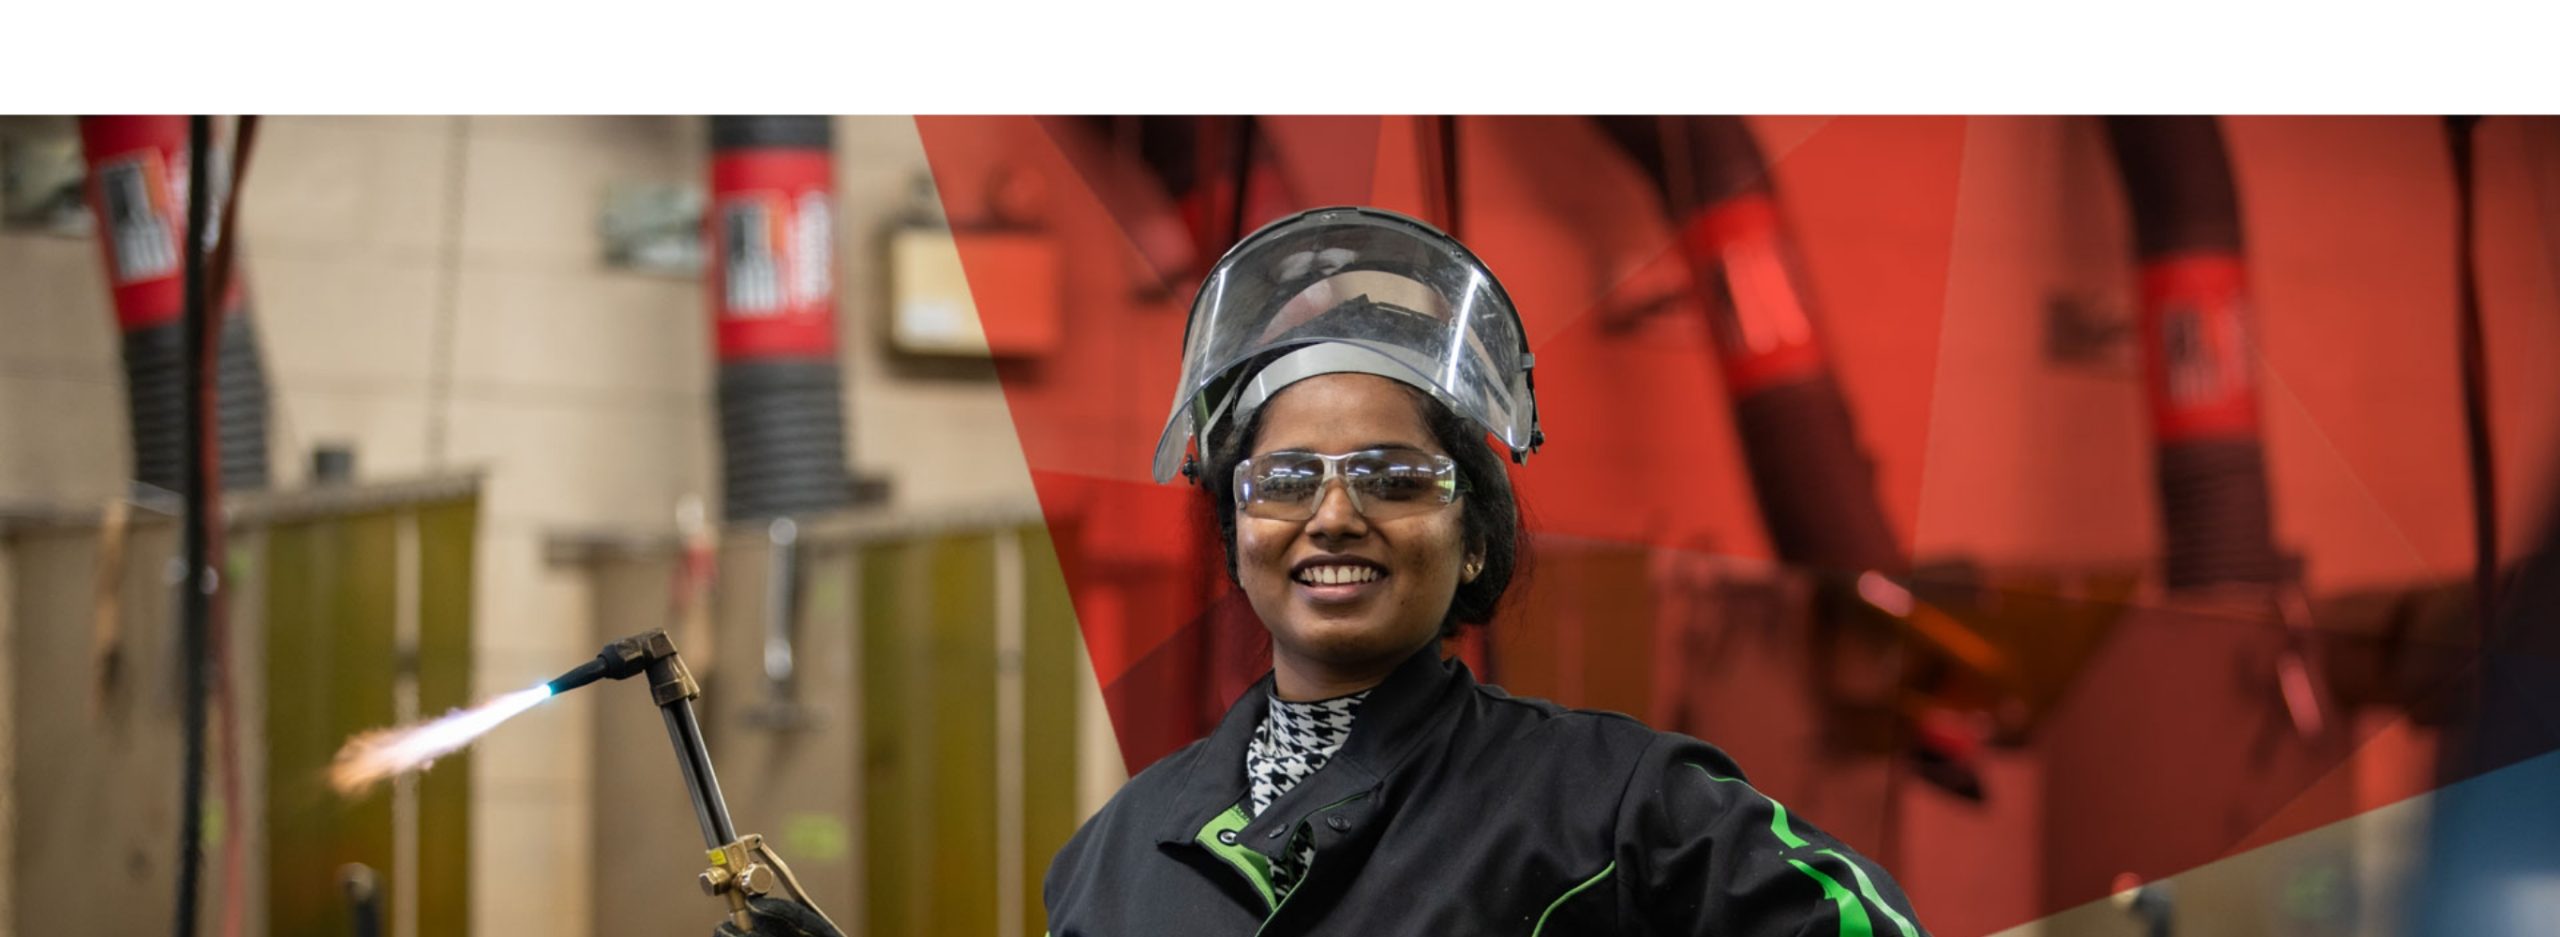 A female tradeswoman smiling holding a welding tool